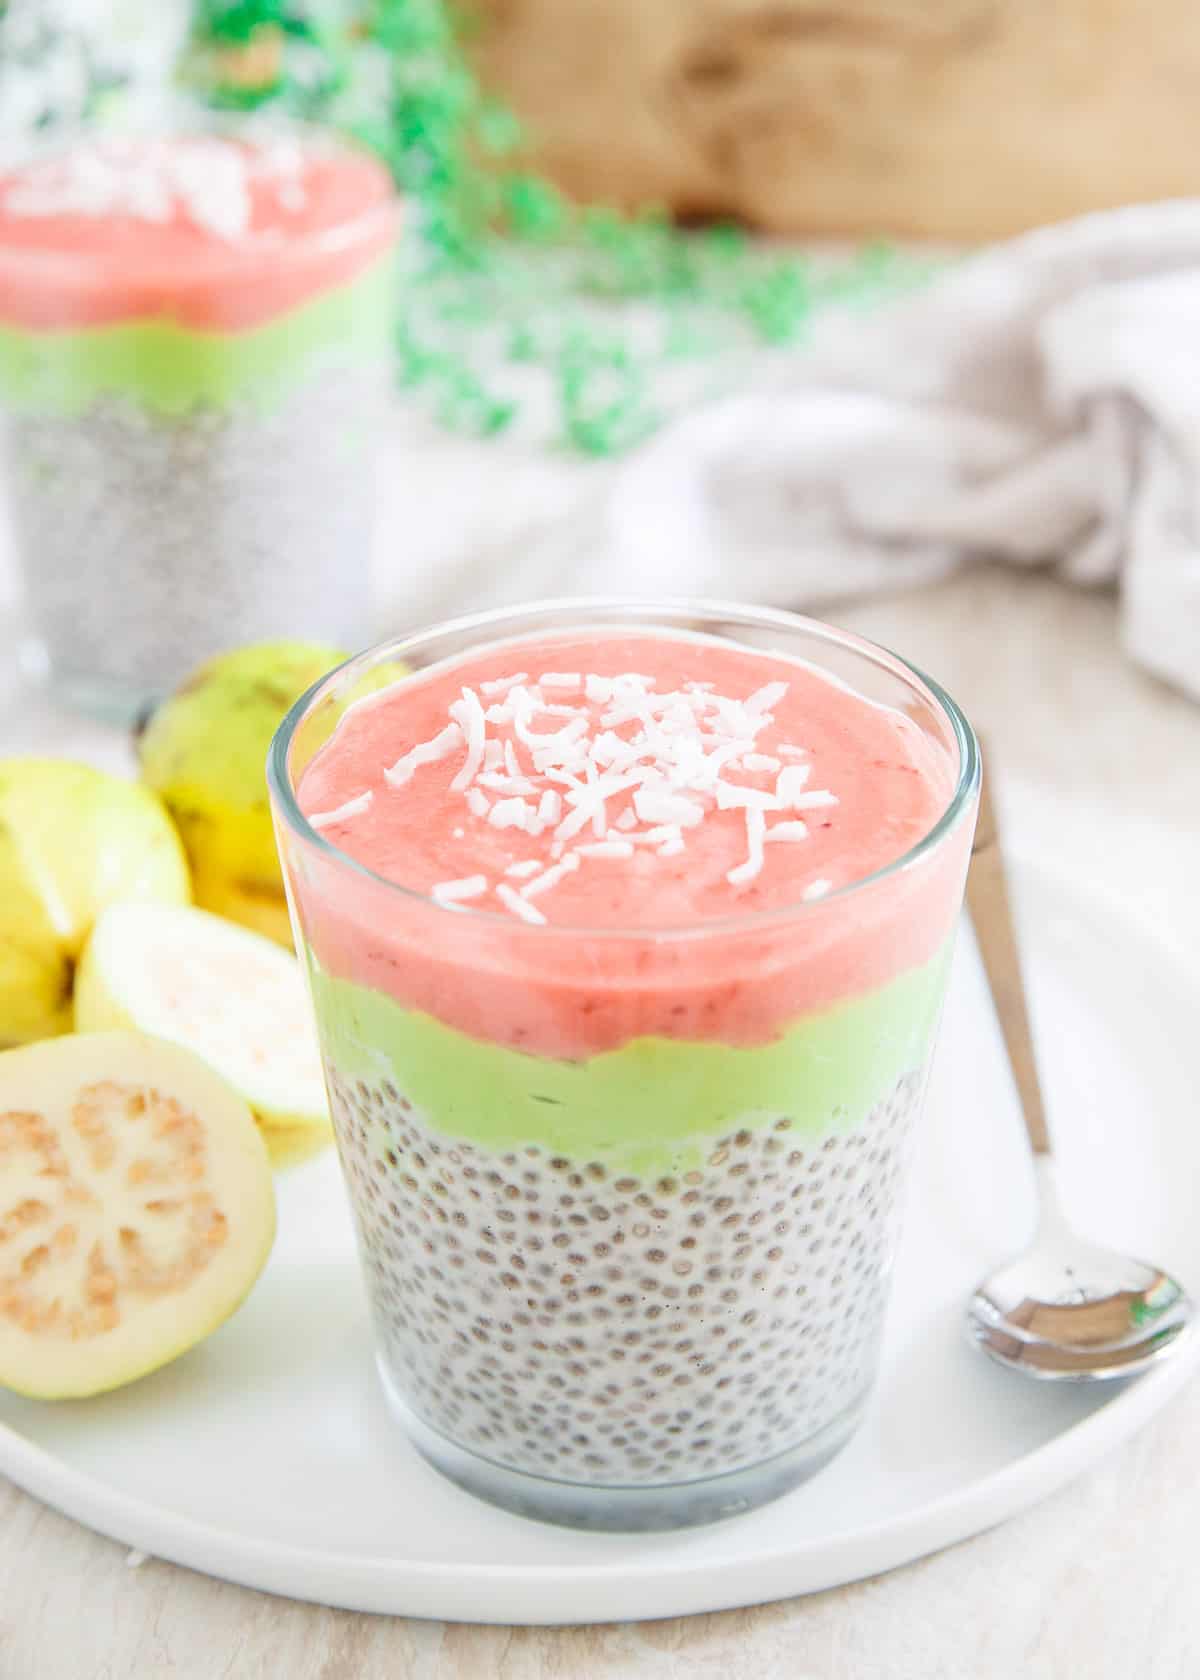 Strawberry Guava Chia Pudding is a healthy treat layered with goodness from chia seeds, avocados, strawberries and guava.